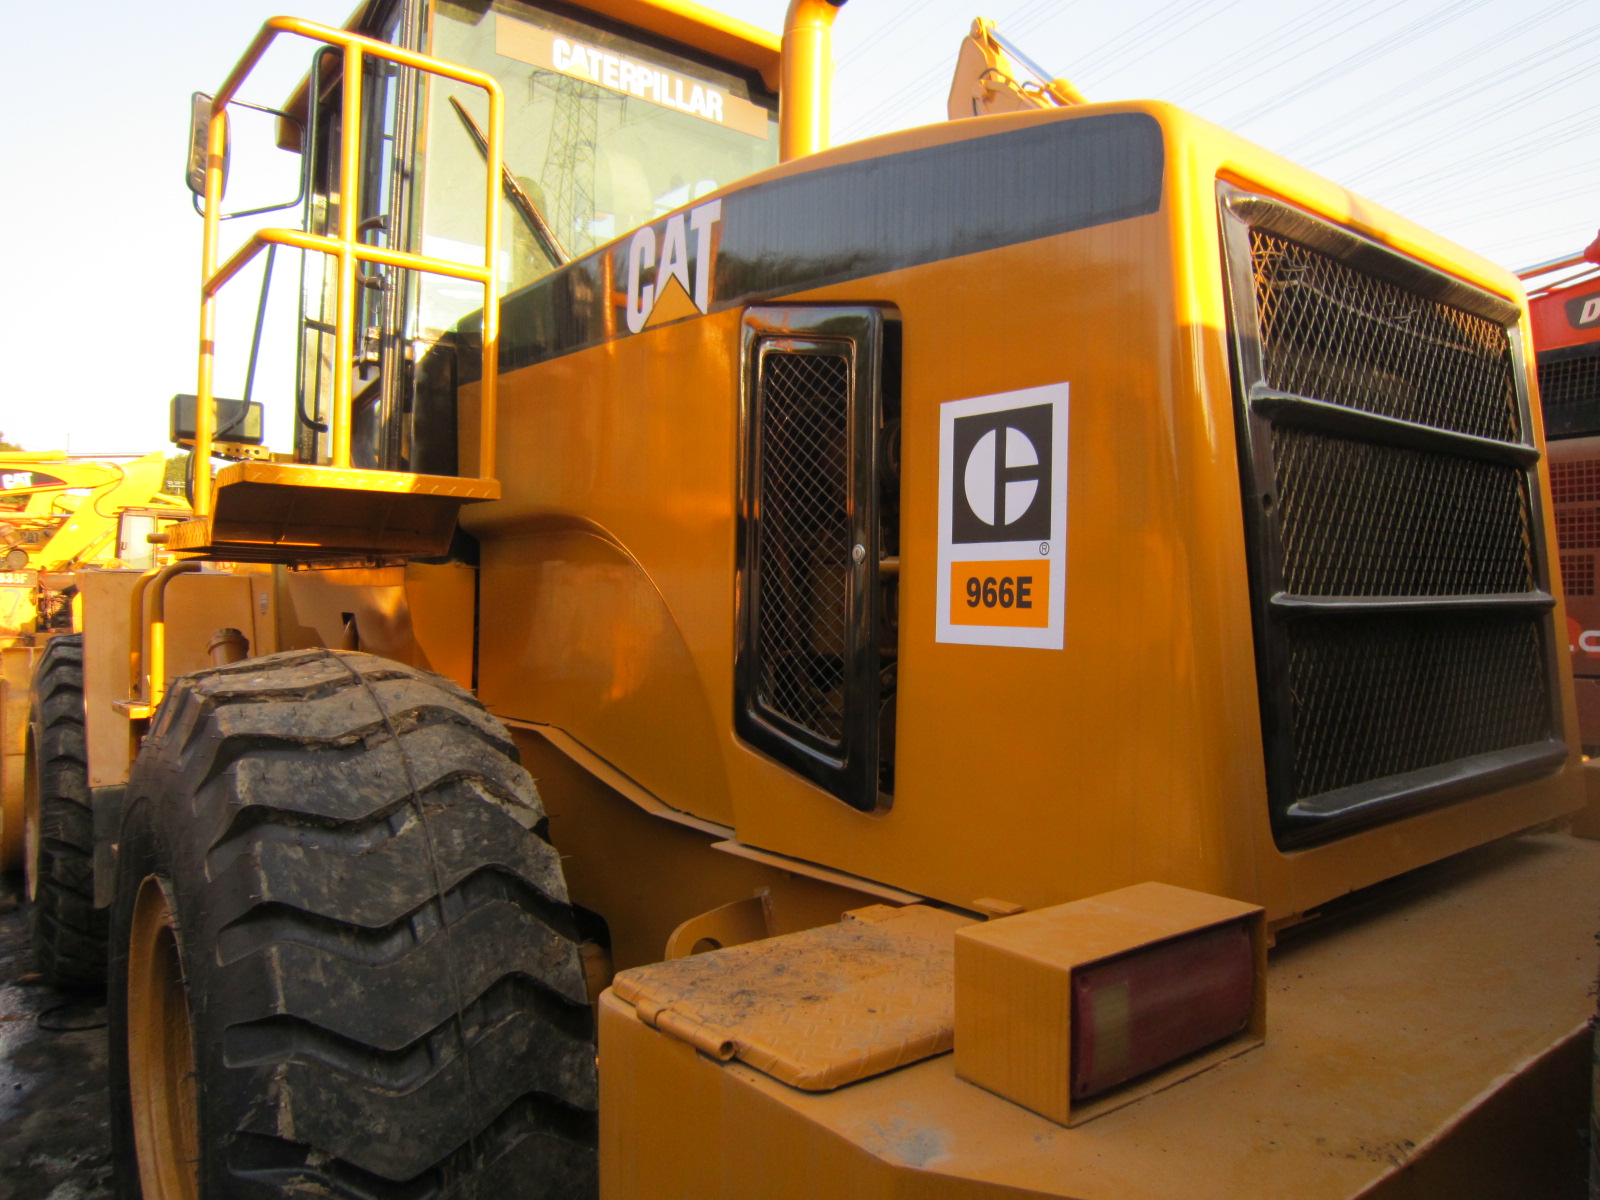 Excellent Condition used CAT 966E Wheel Loader Caterpillar 966H 966G 966E 966F Wheel LoadersUsed caterpillar 966C 966